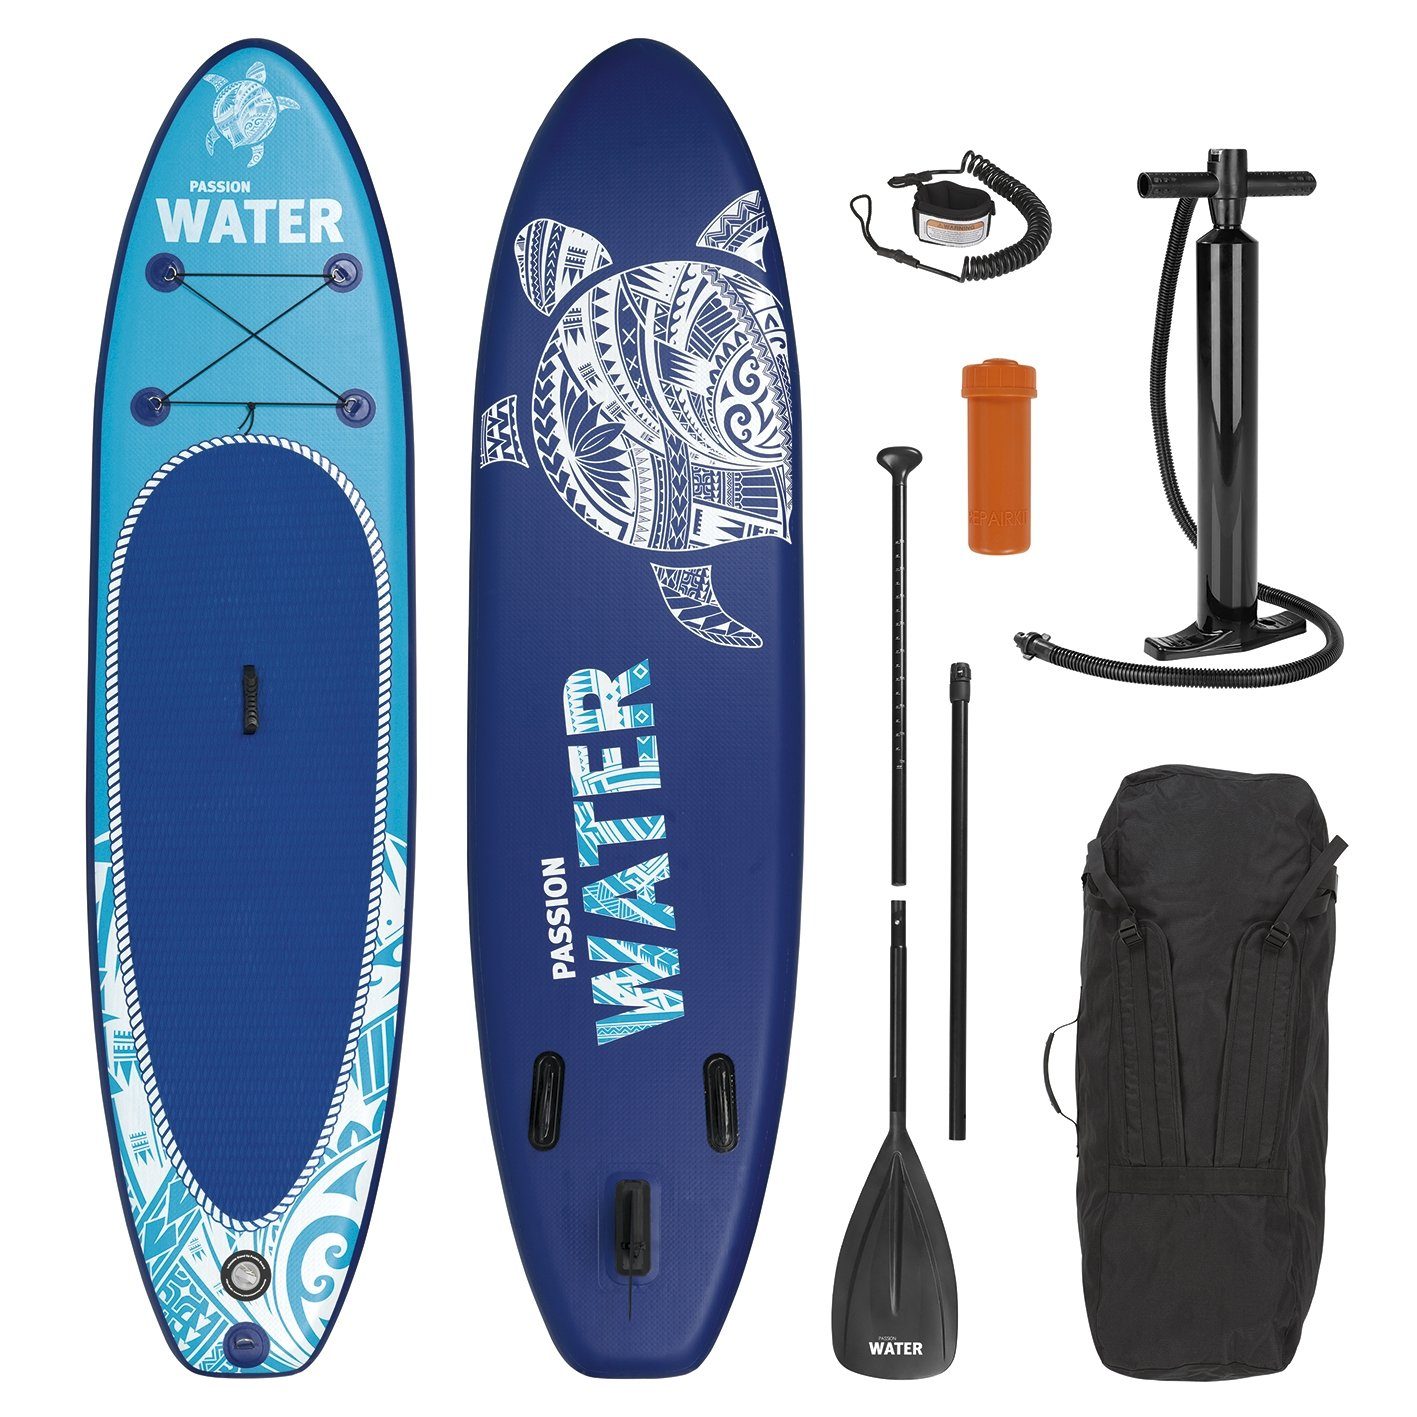 Komplett cm, Stand-Up Paddling Set MAXXMEE Board Stand up Paddle SUP Board inkl. Inflatable Paddel blau/türkis 300 Paddle-Board SUP-Board, 110kg,